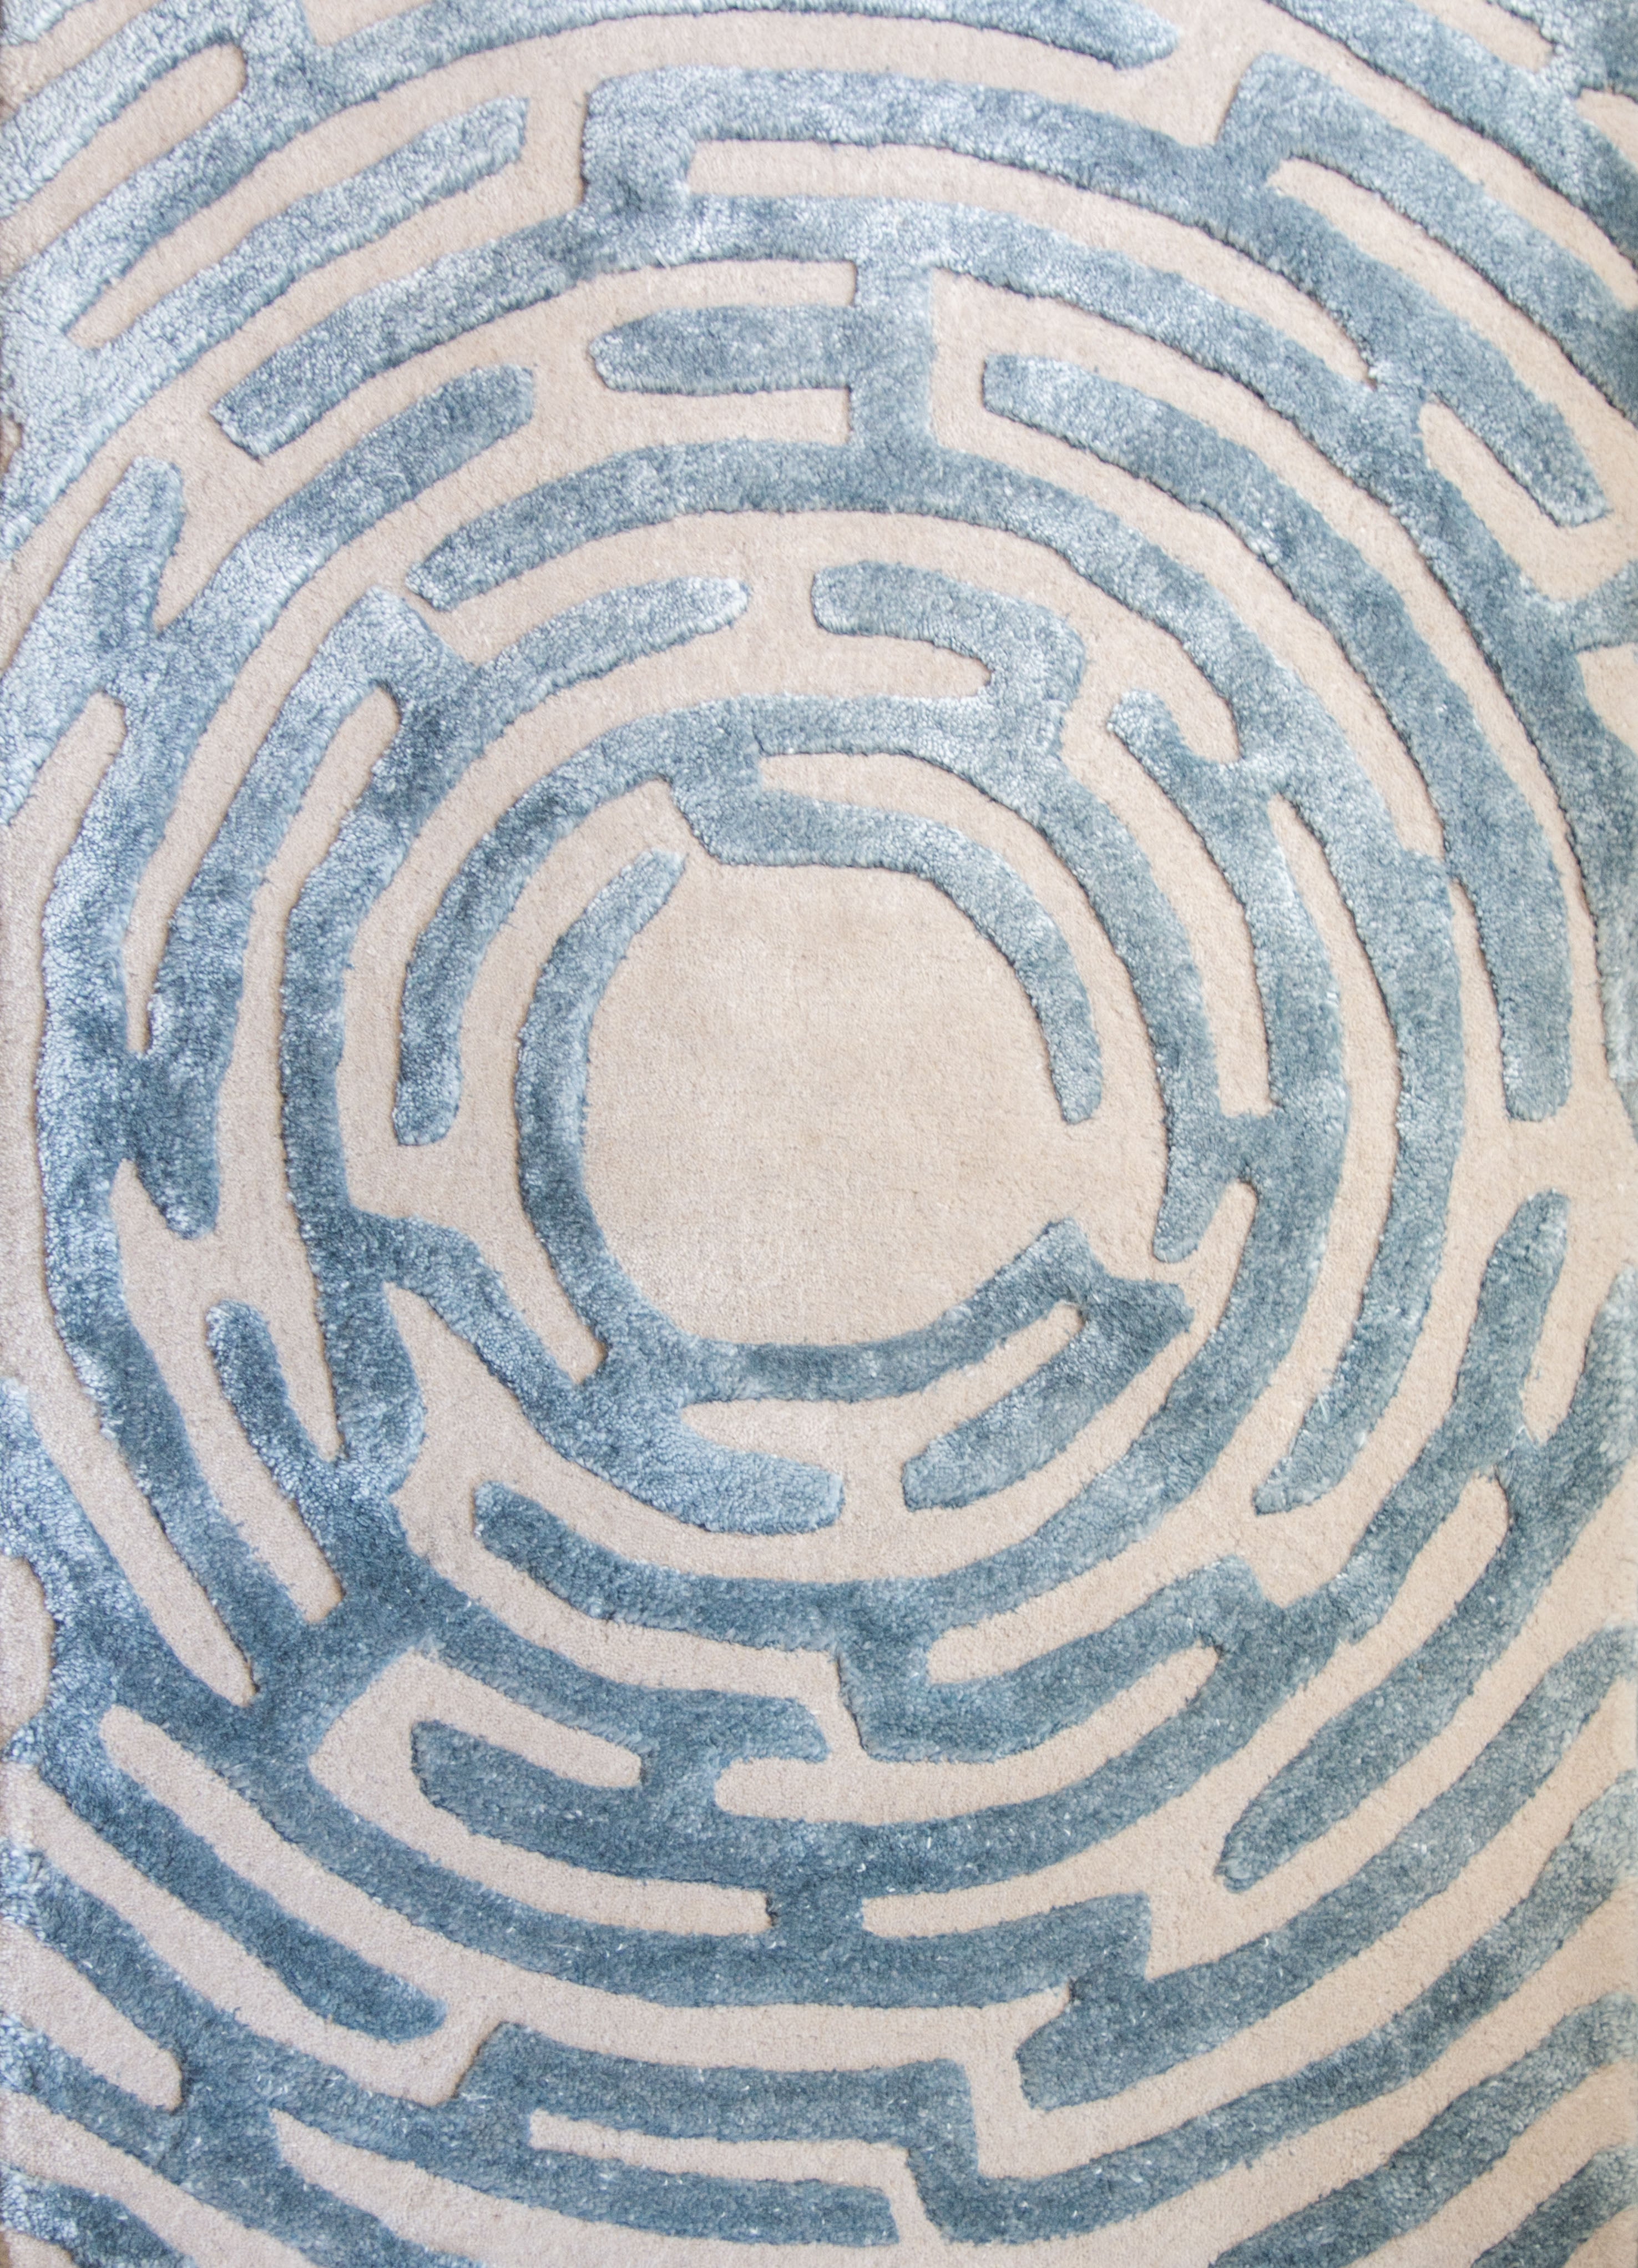 An up-close view of the center of a Maze luxury floor rug in sky blue